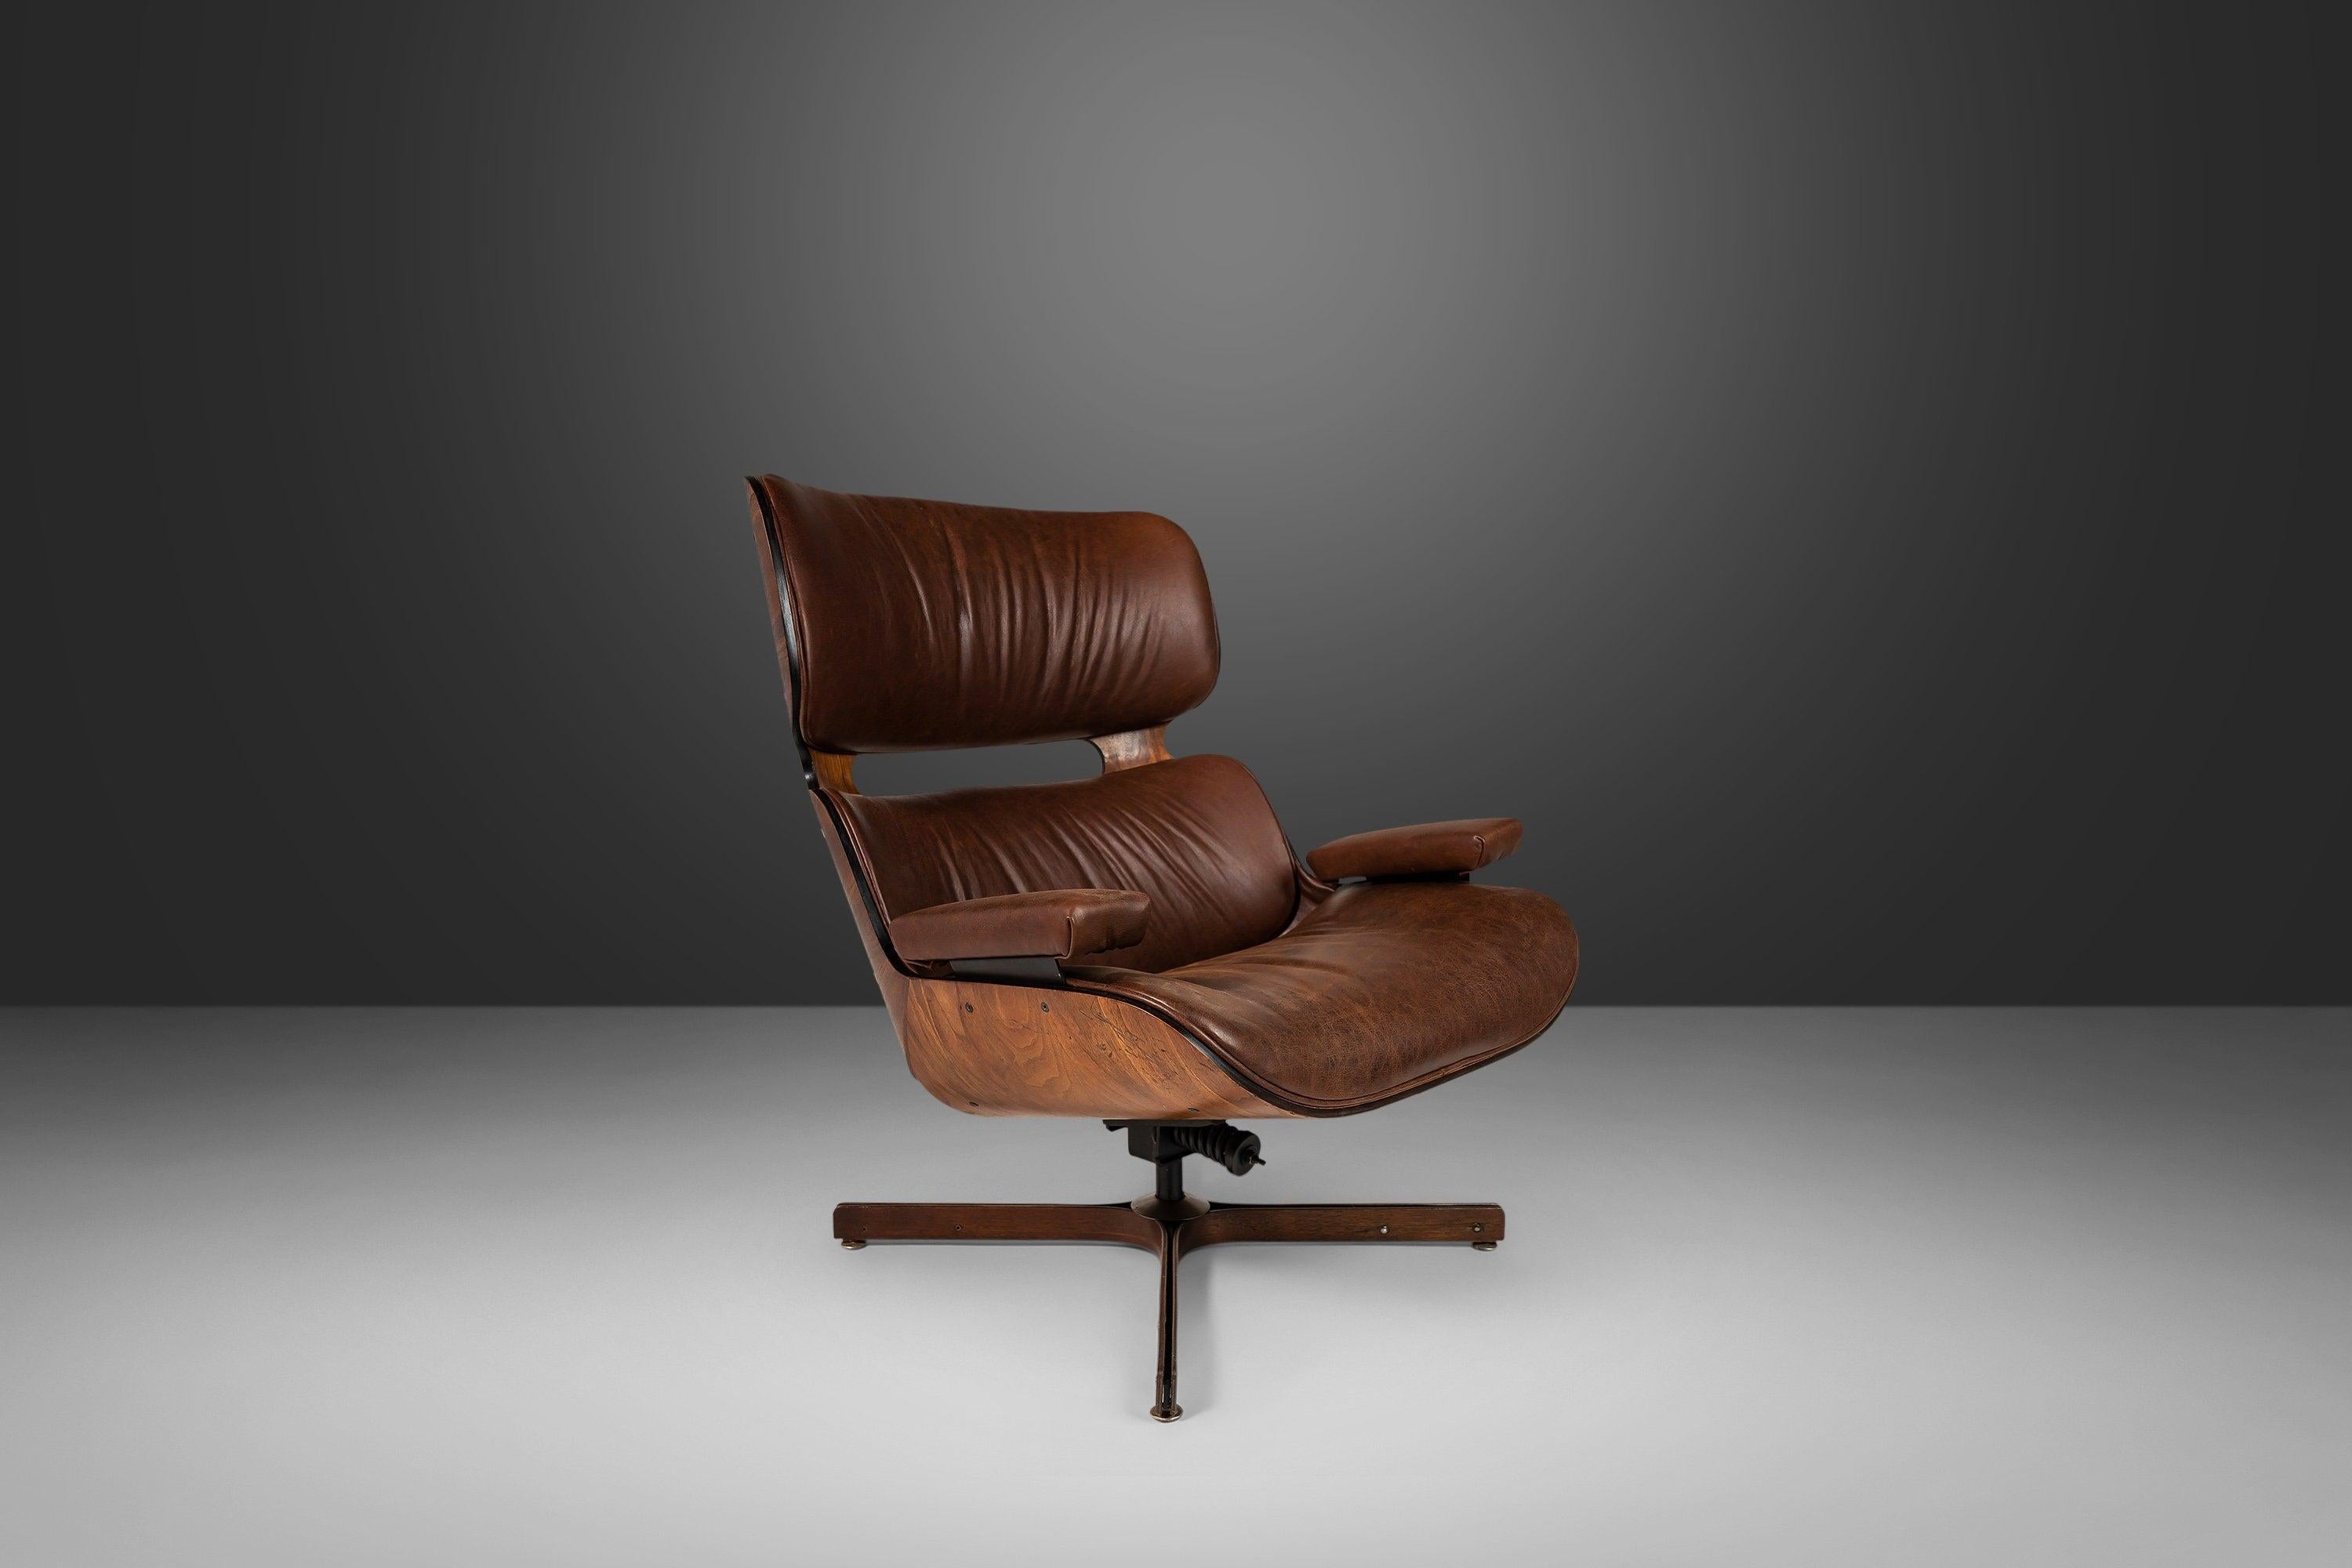 The perfect amalgamation of comfort and style, this iconic chair is a superb archetype for American mid-century seating design. This vintage design has recently received a modern upgrade from the original leatherette to genuine leather hide